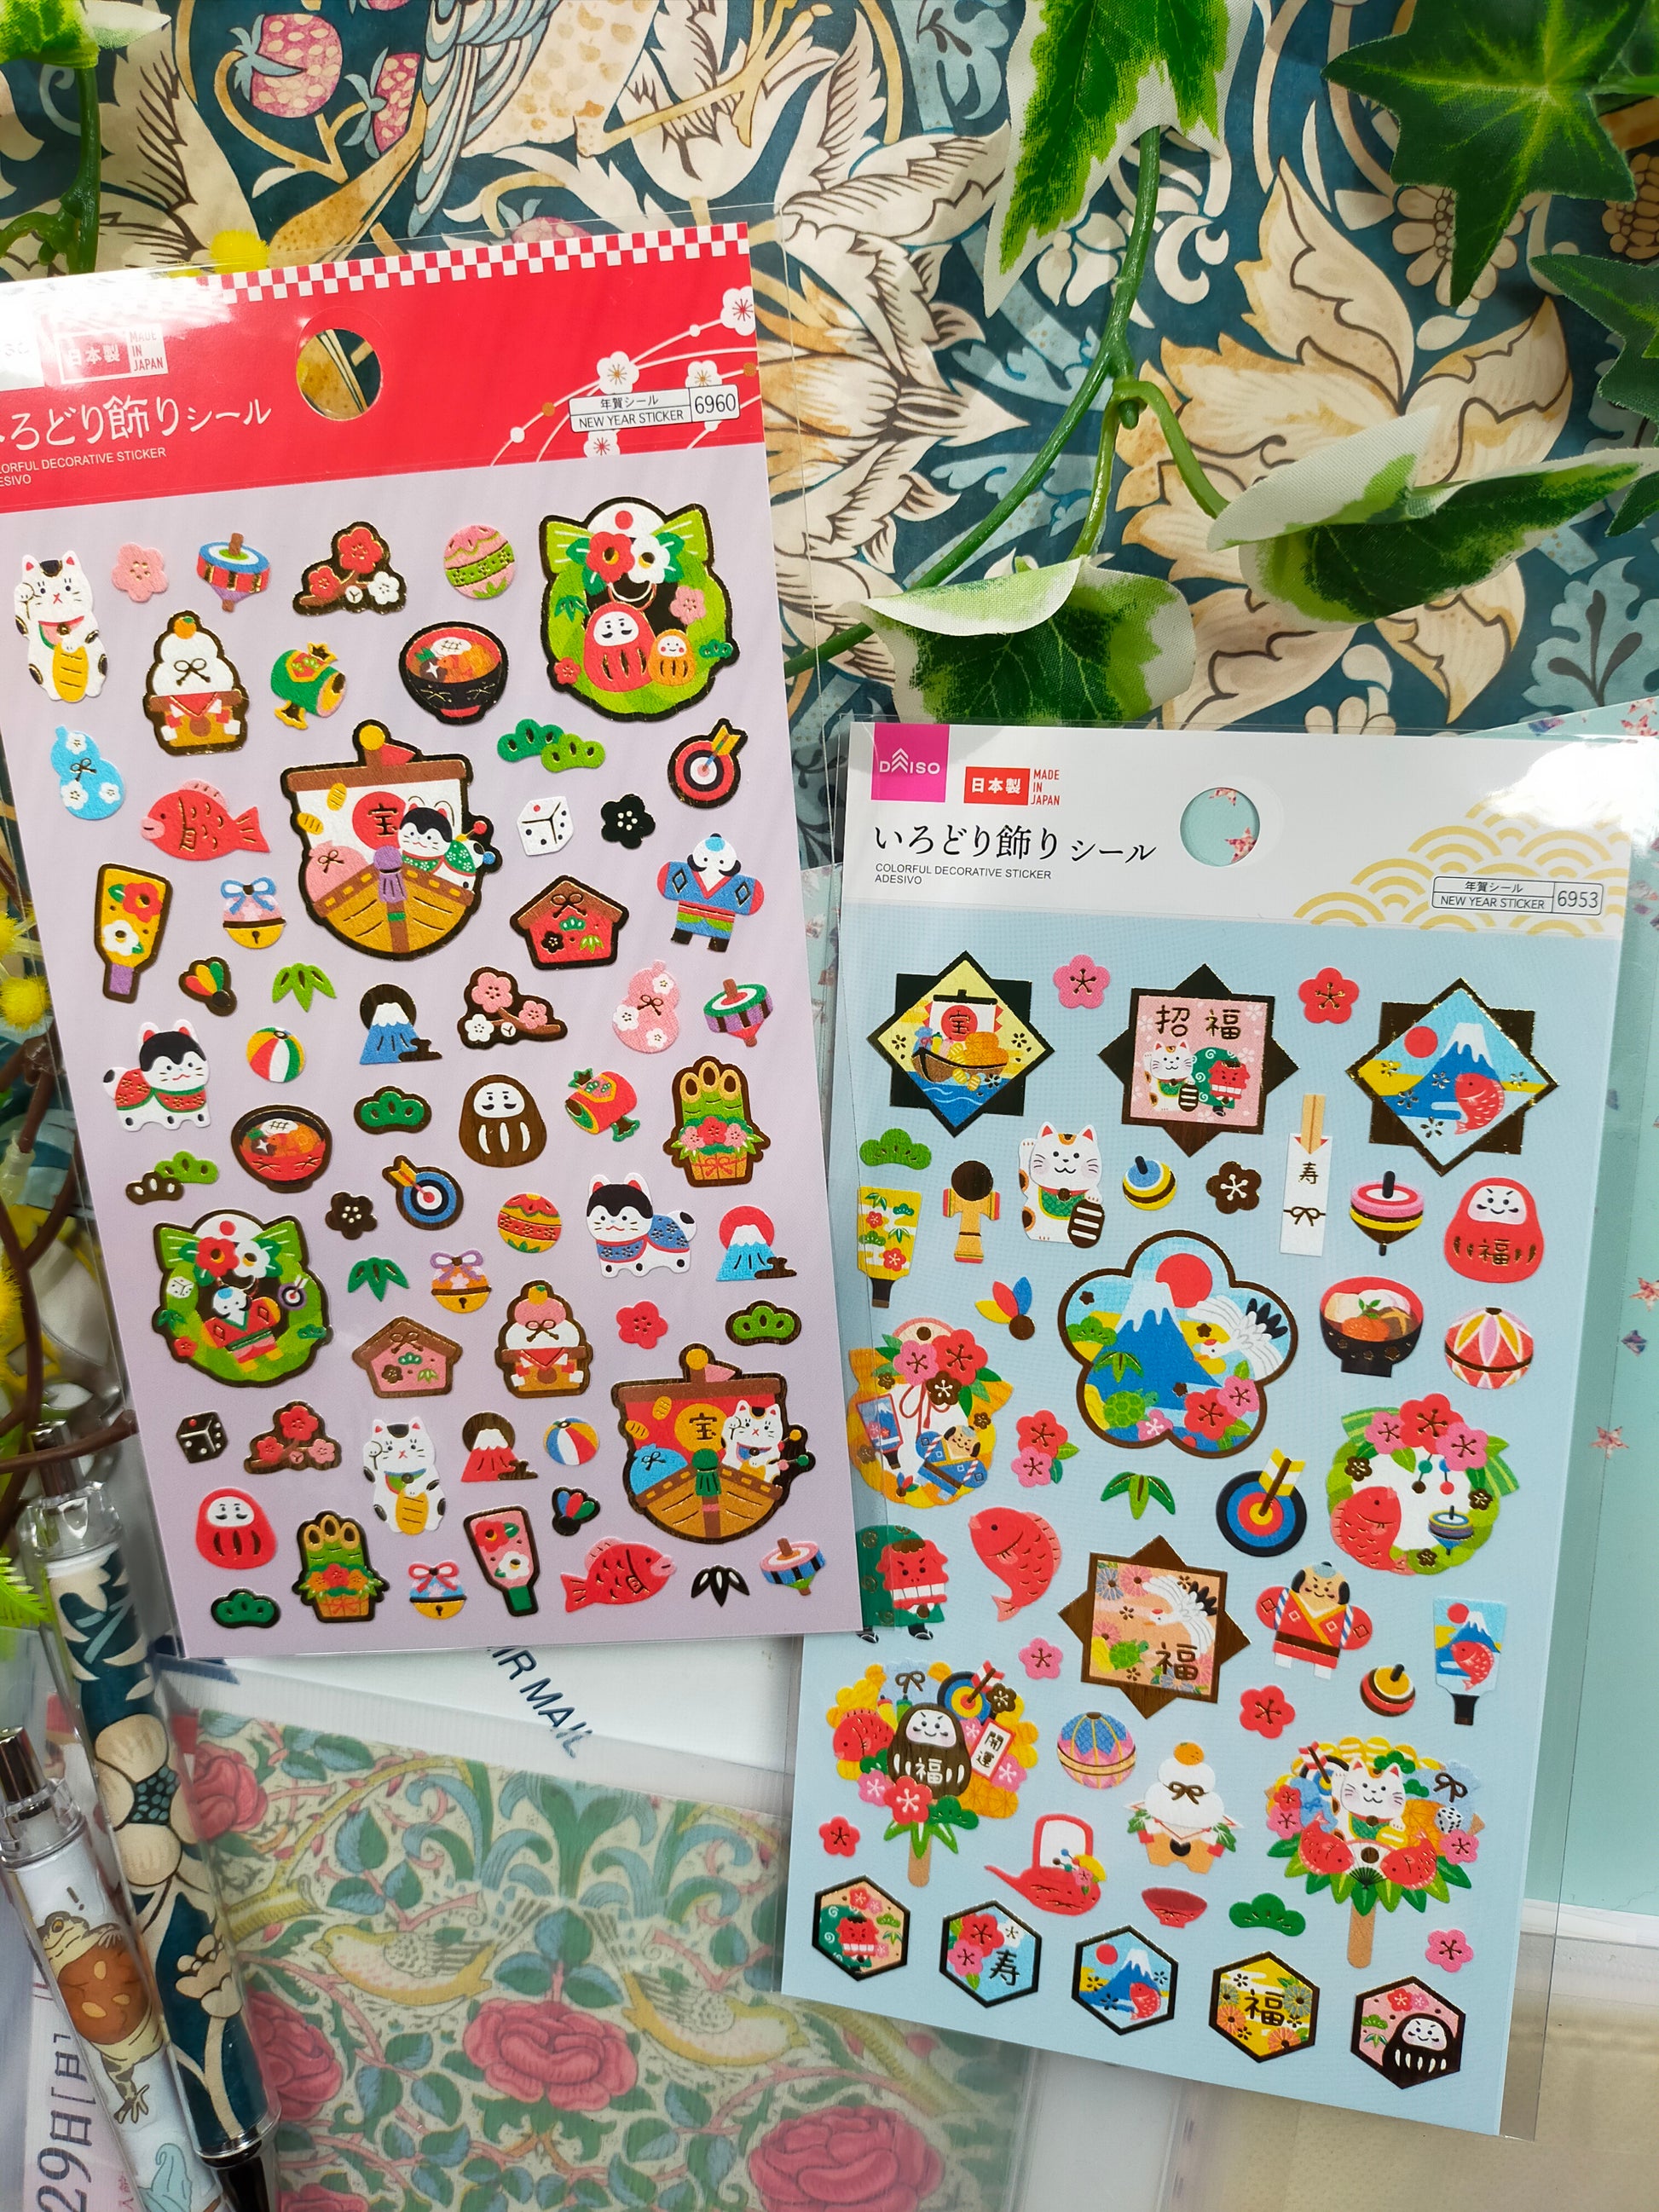 Colored Japanese decorative stickers, daiso_ Treasure Ship / Lucky Charms